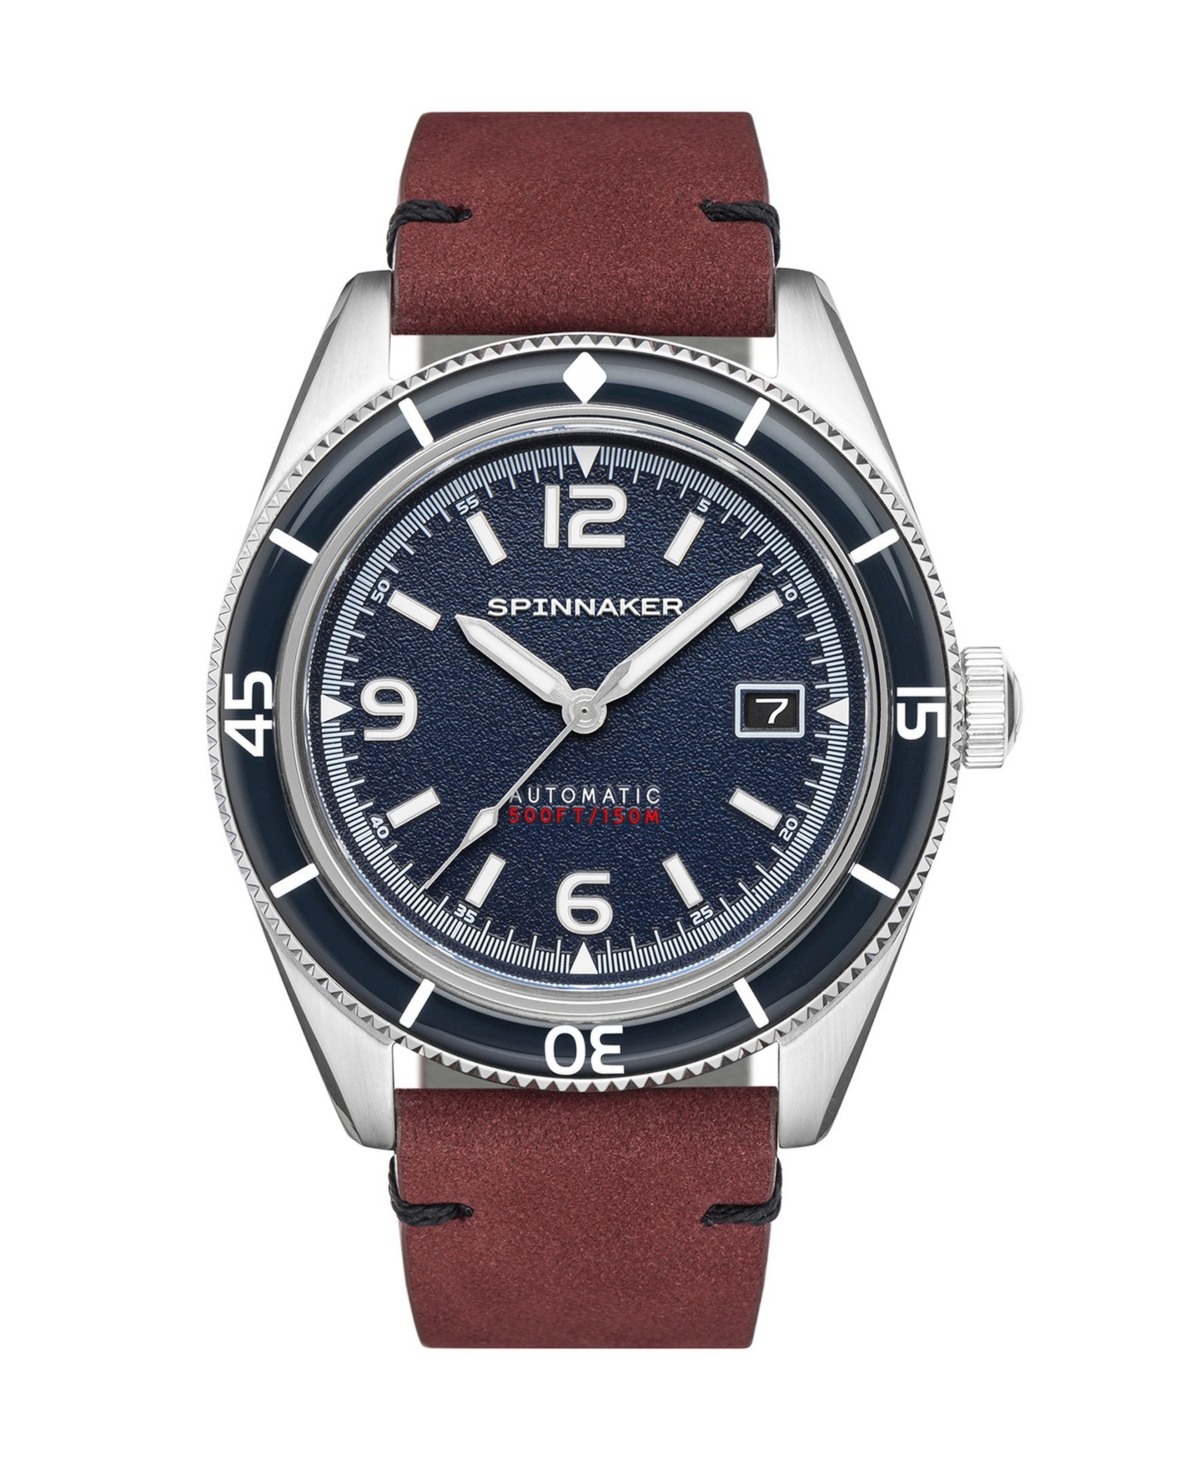 Men's Fleuss Automatic Red Genuine Leather Strap Watch, 43mm - Prussian Blue